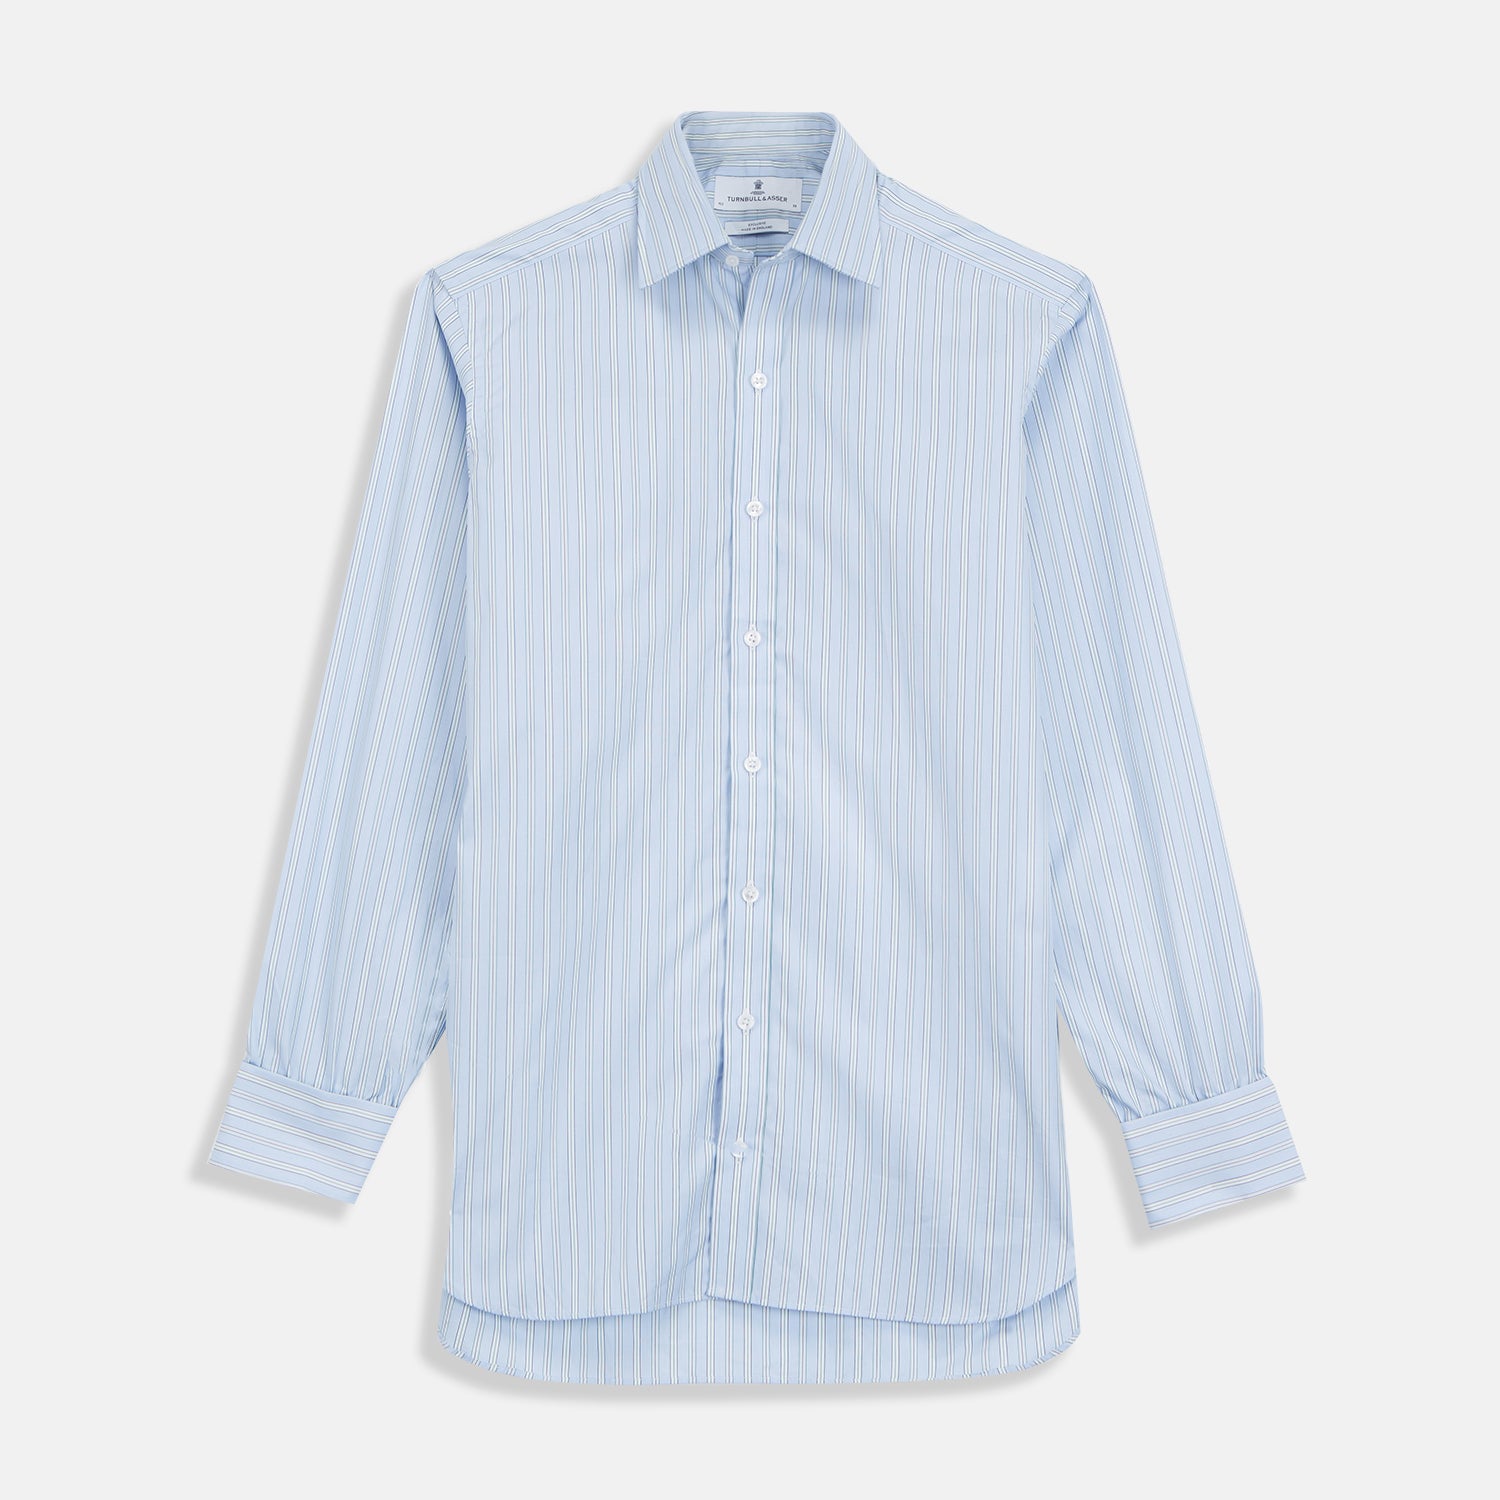 Blue and White Fine Stripe Shirt with T&A Collar and 3-Button Cuffs